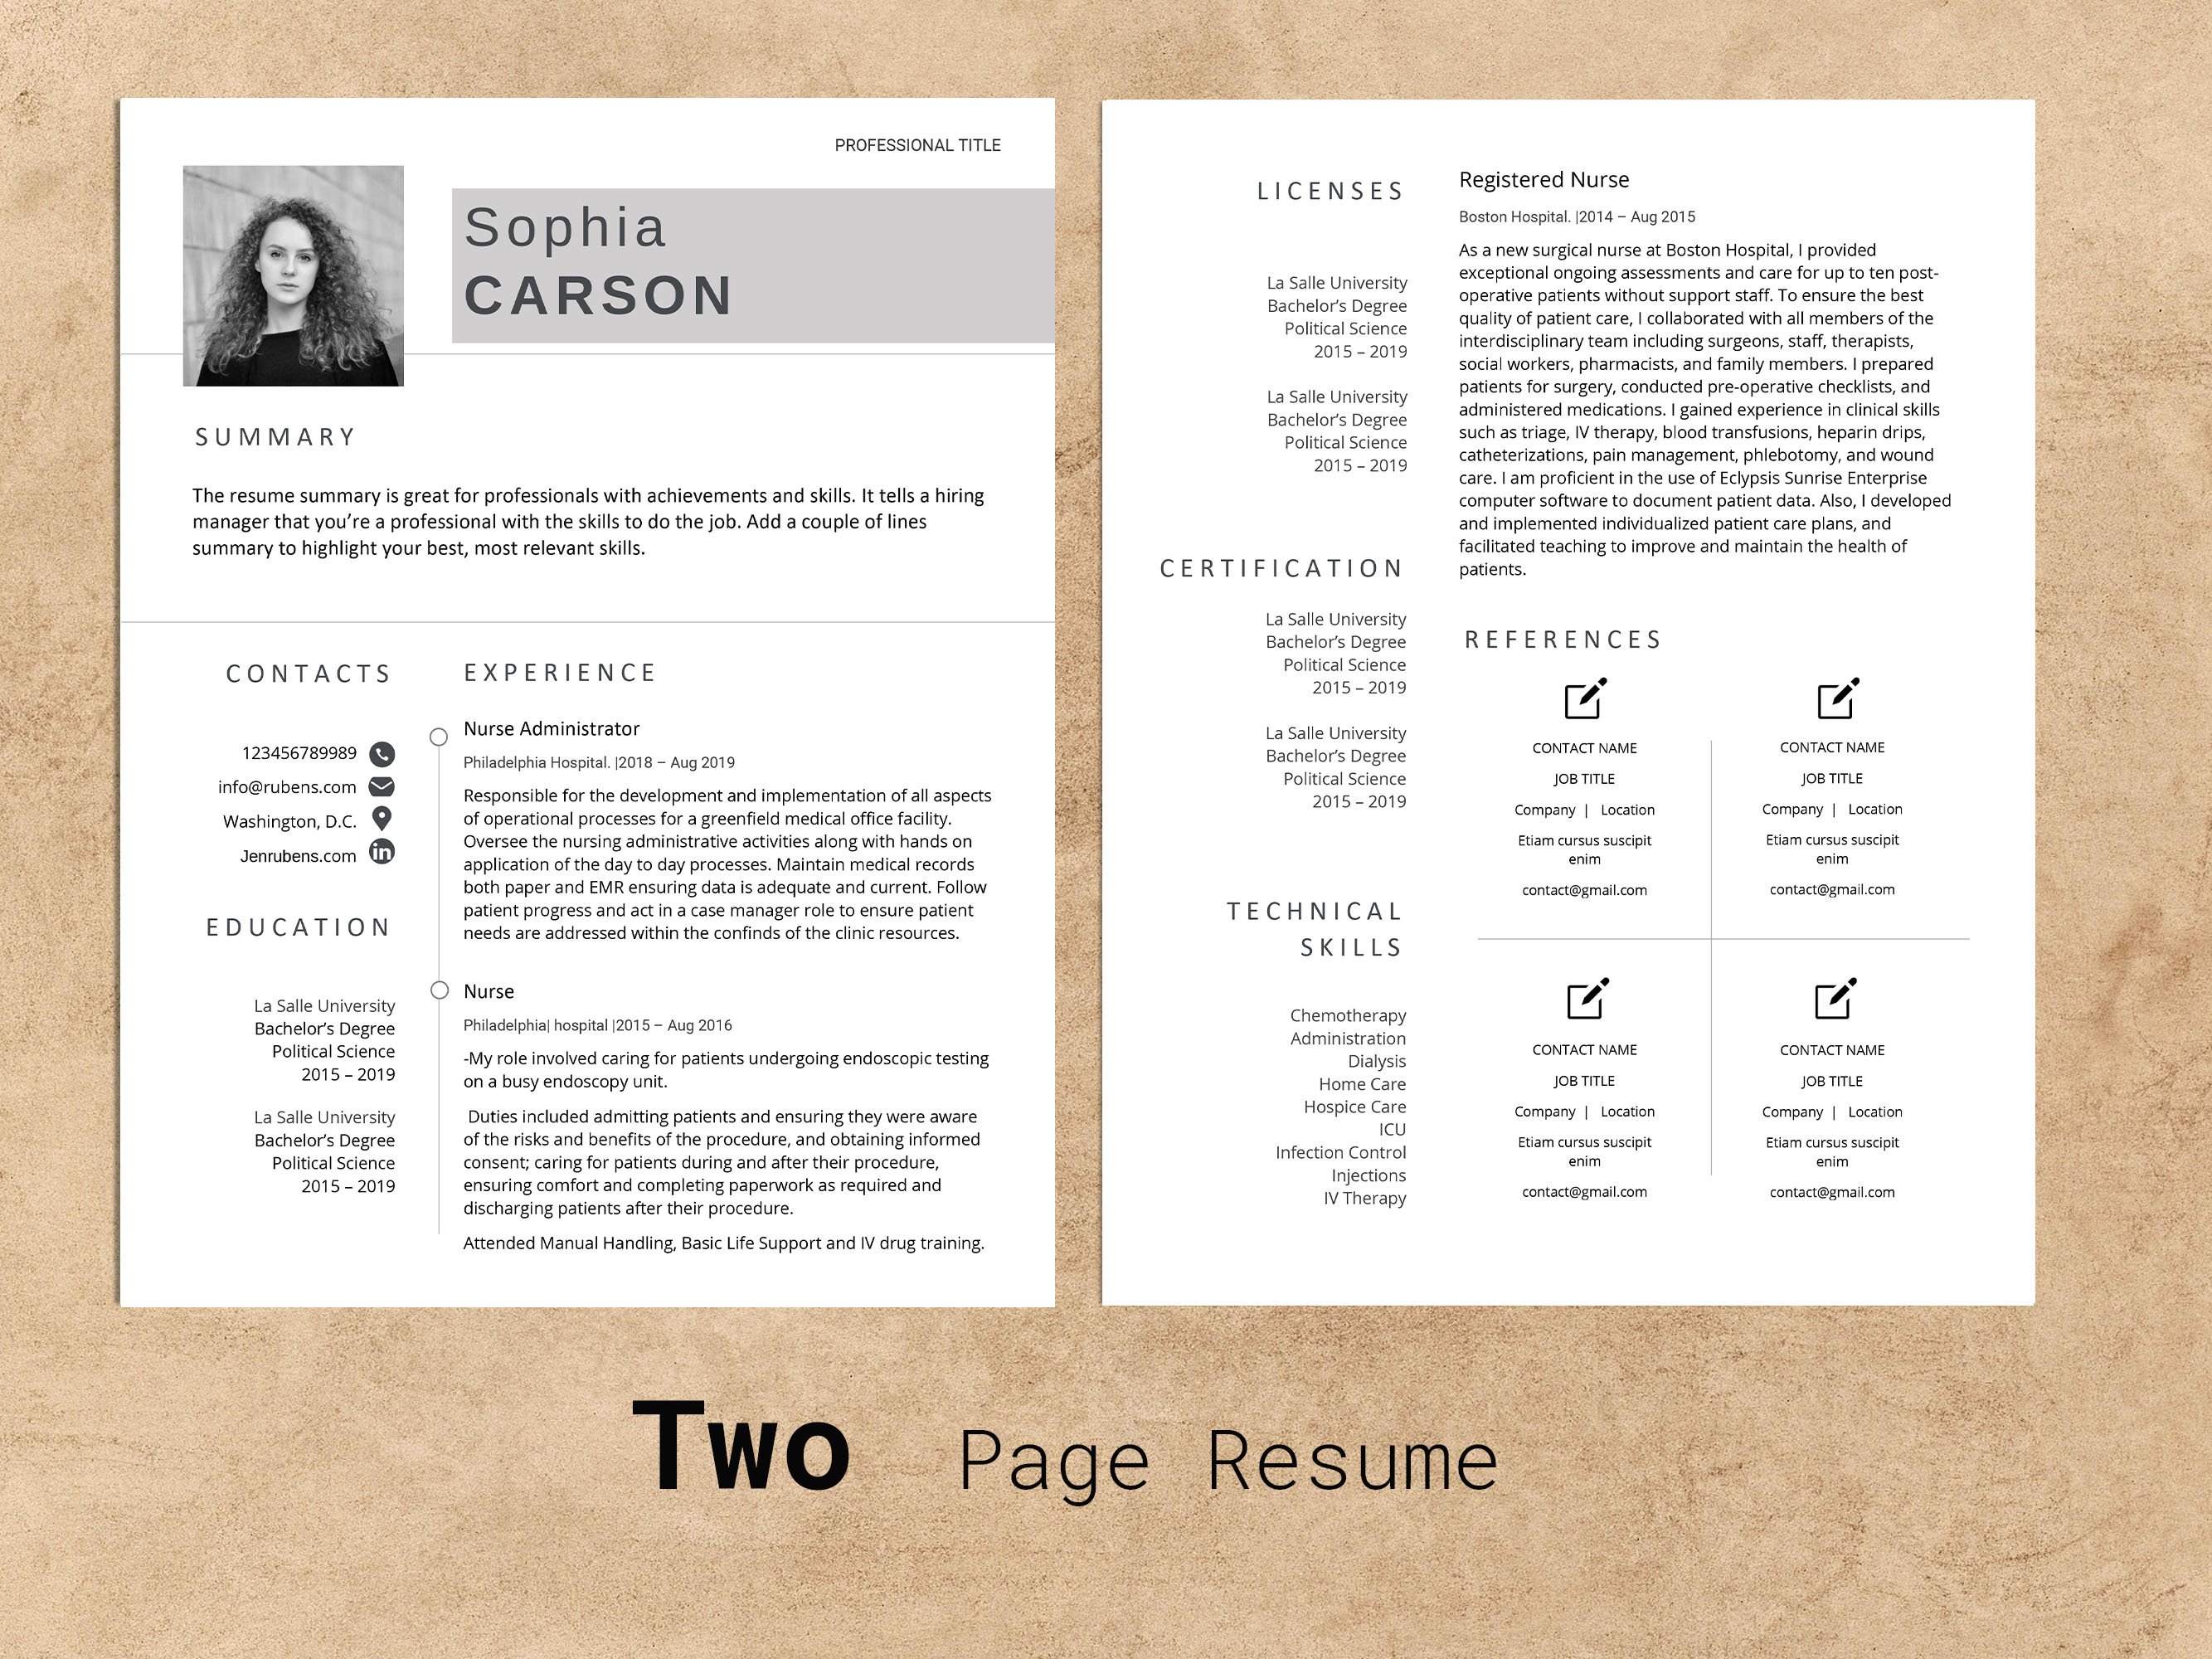 Two pages of a resume on a piece of paper.